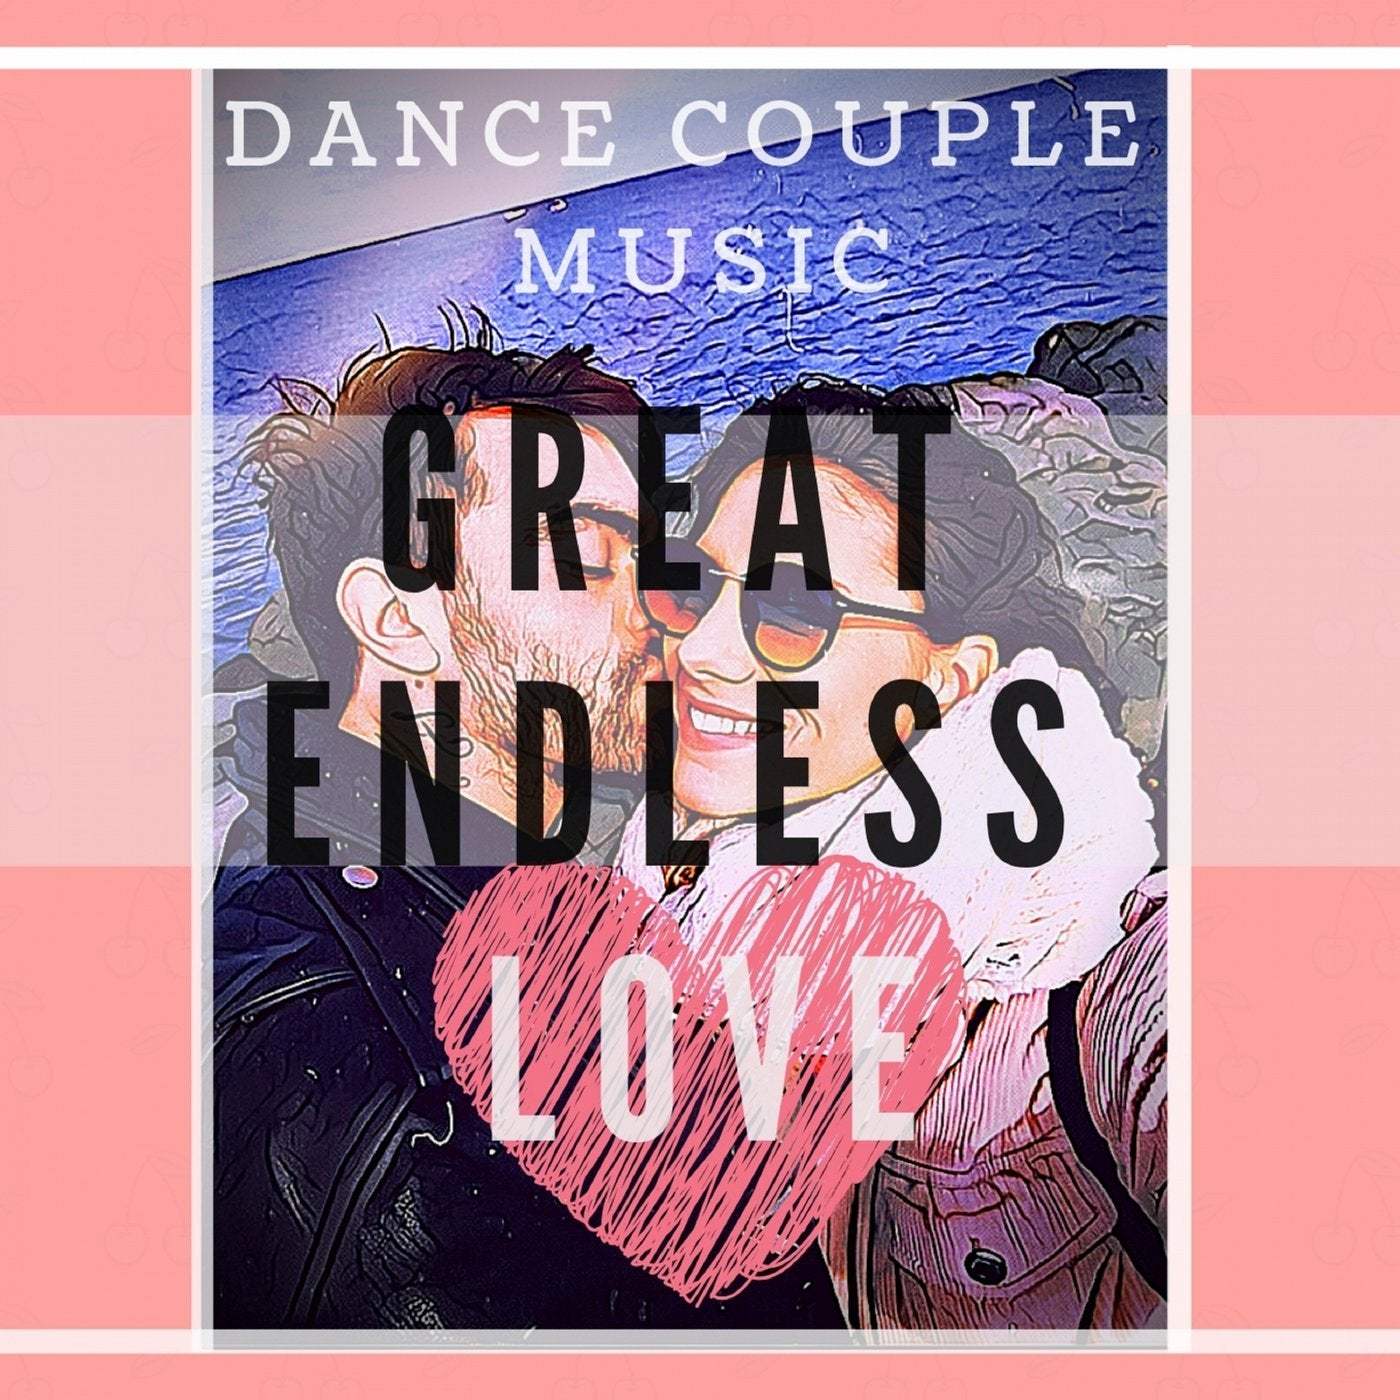 DANCE COUPLE MUSIC GREAT ENDLESS LOVE